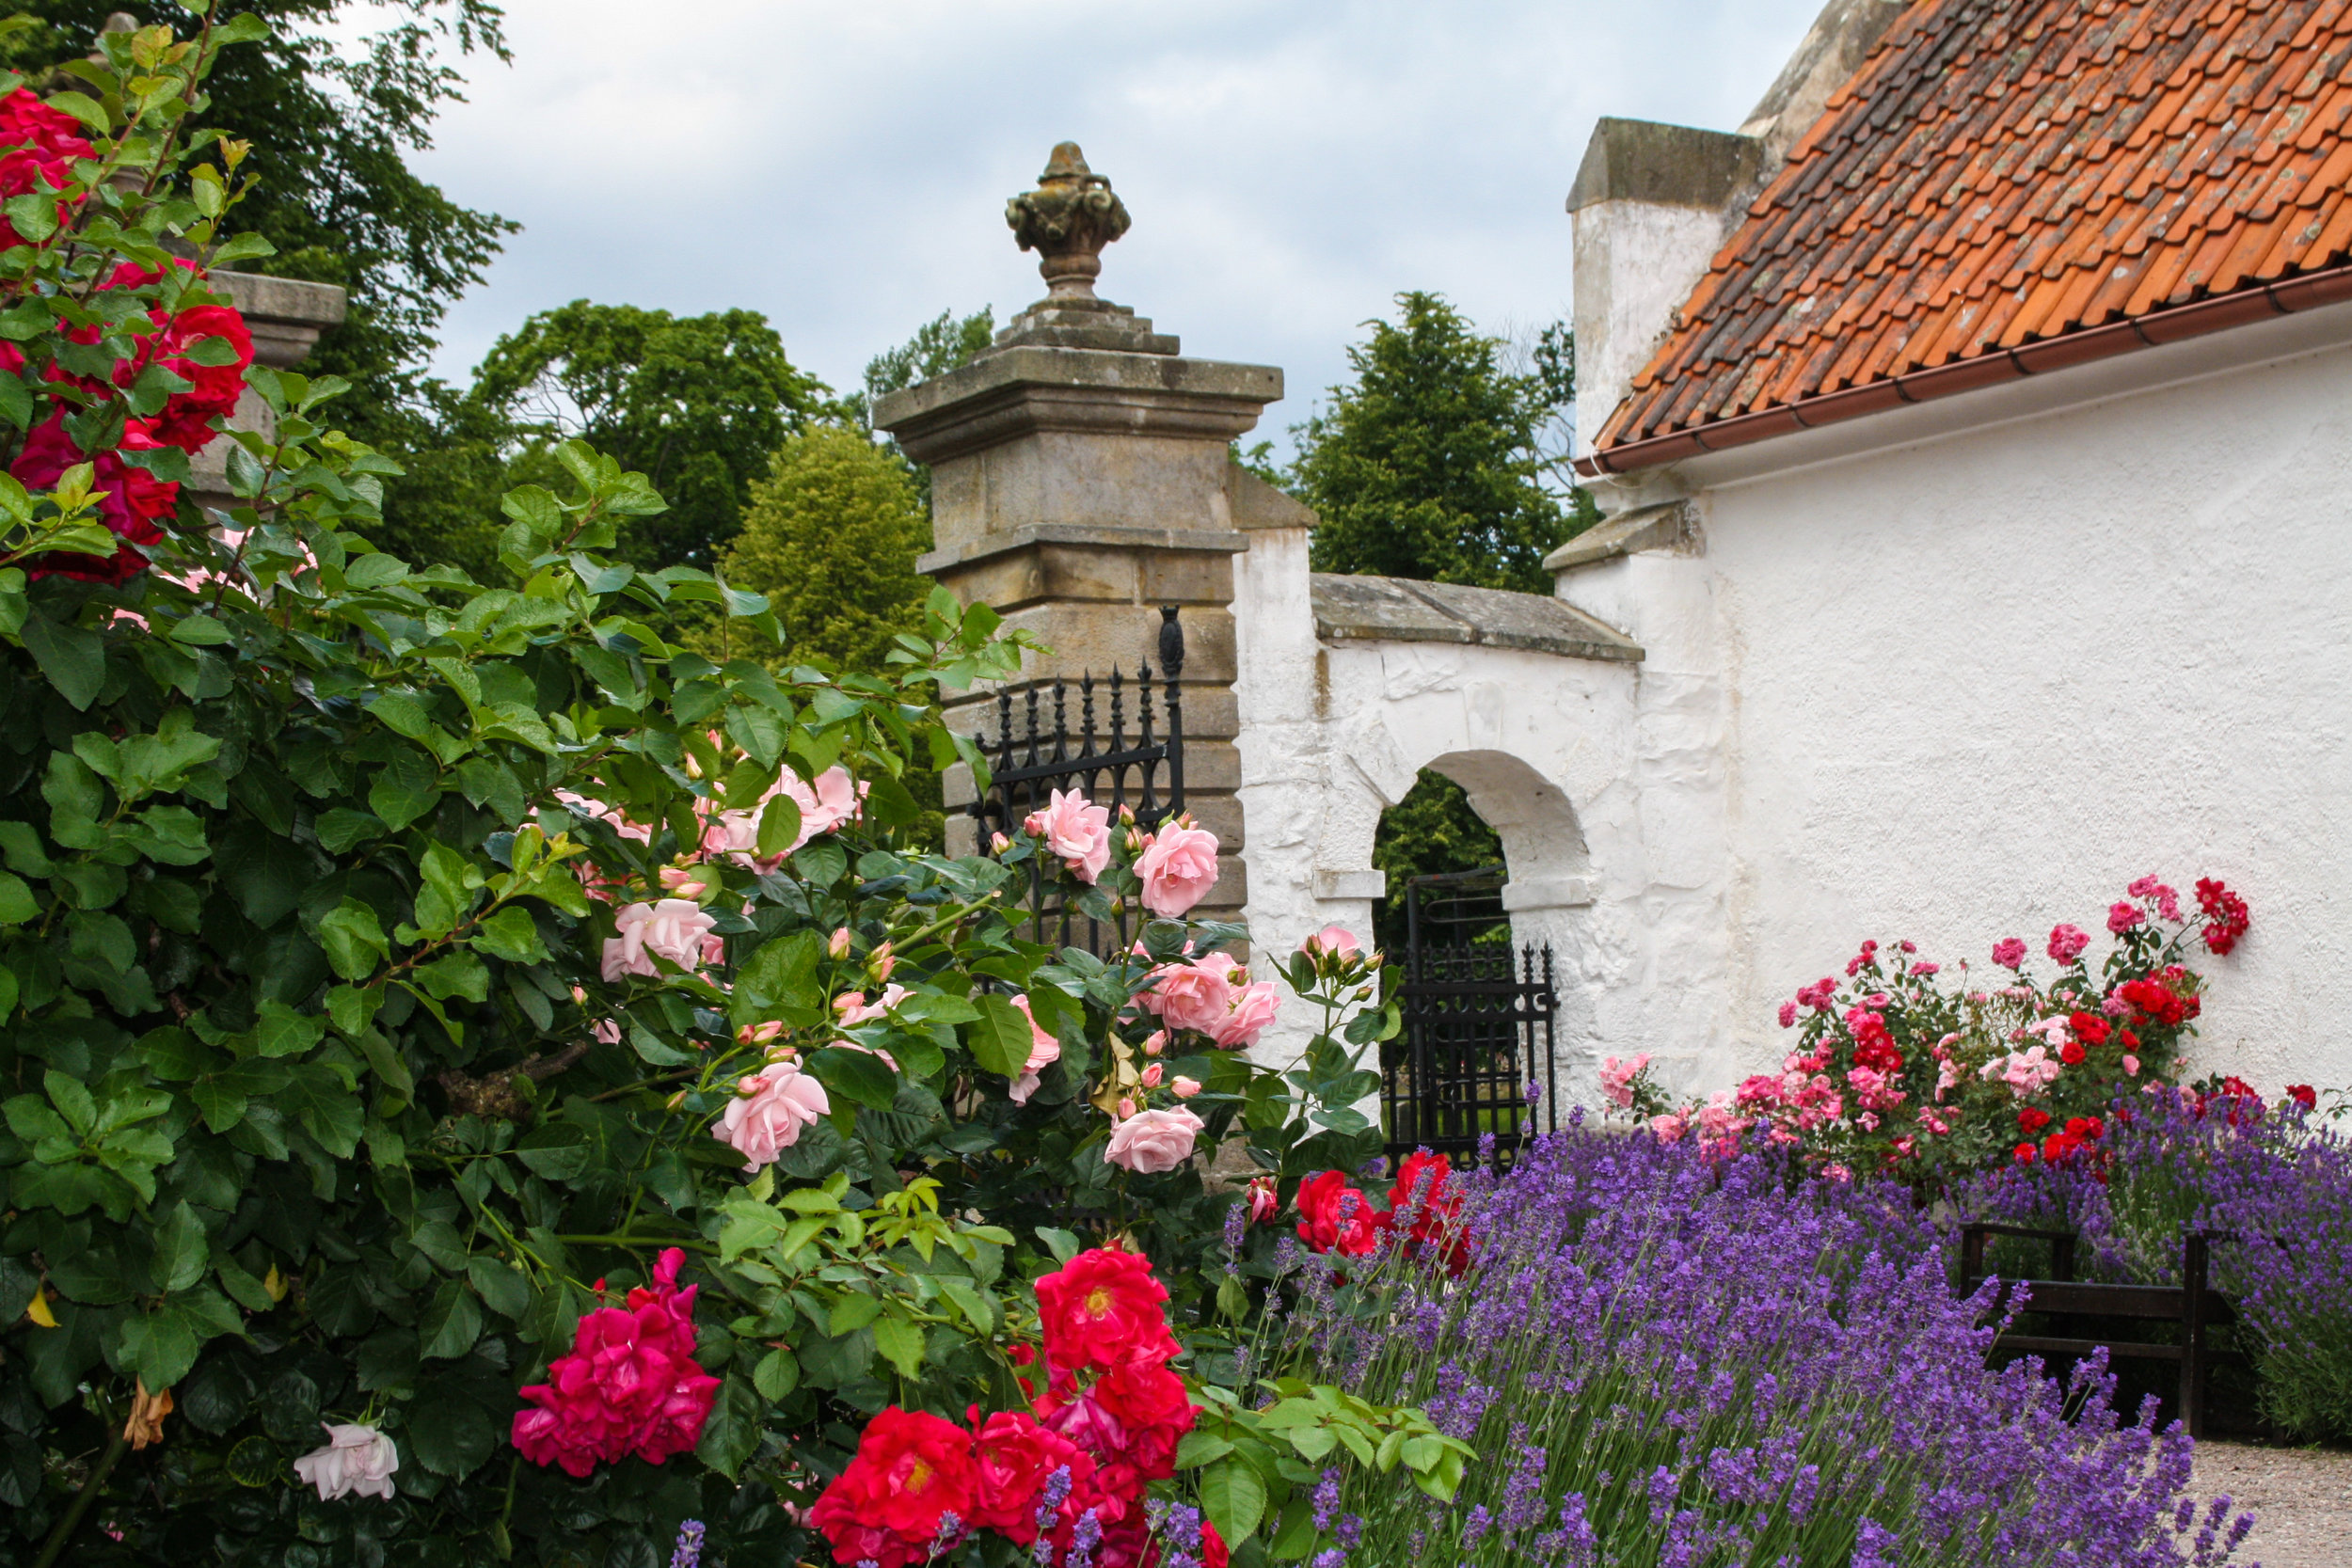  In the Court Yard, roses bloom among lavender, framed in by box hedges. 